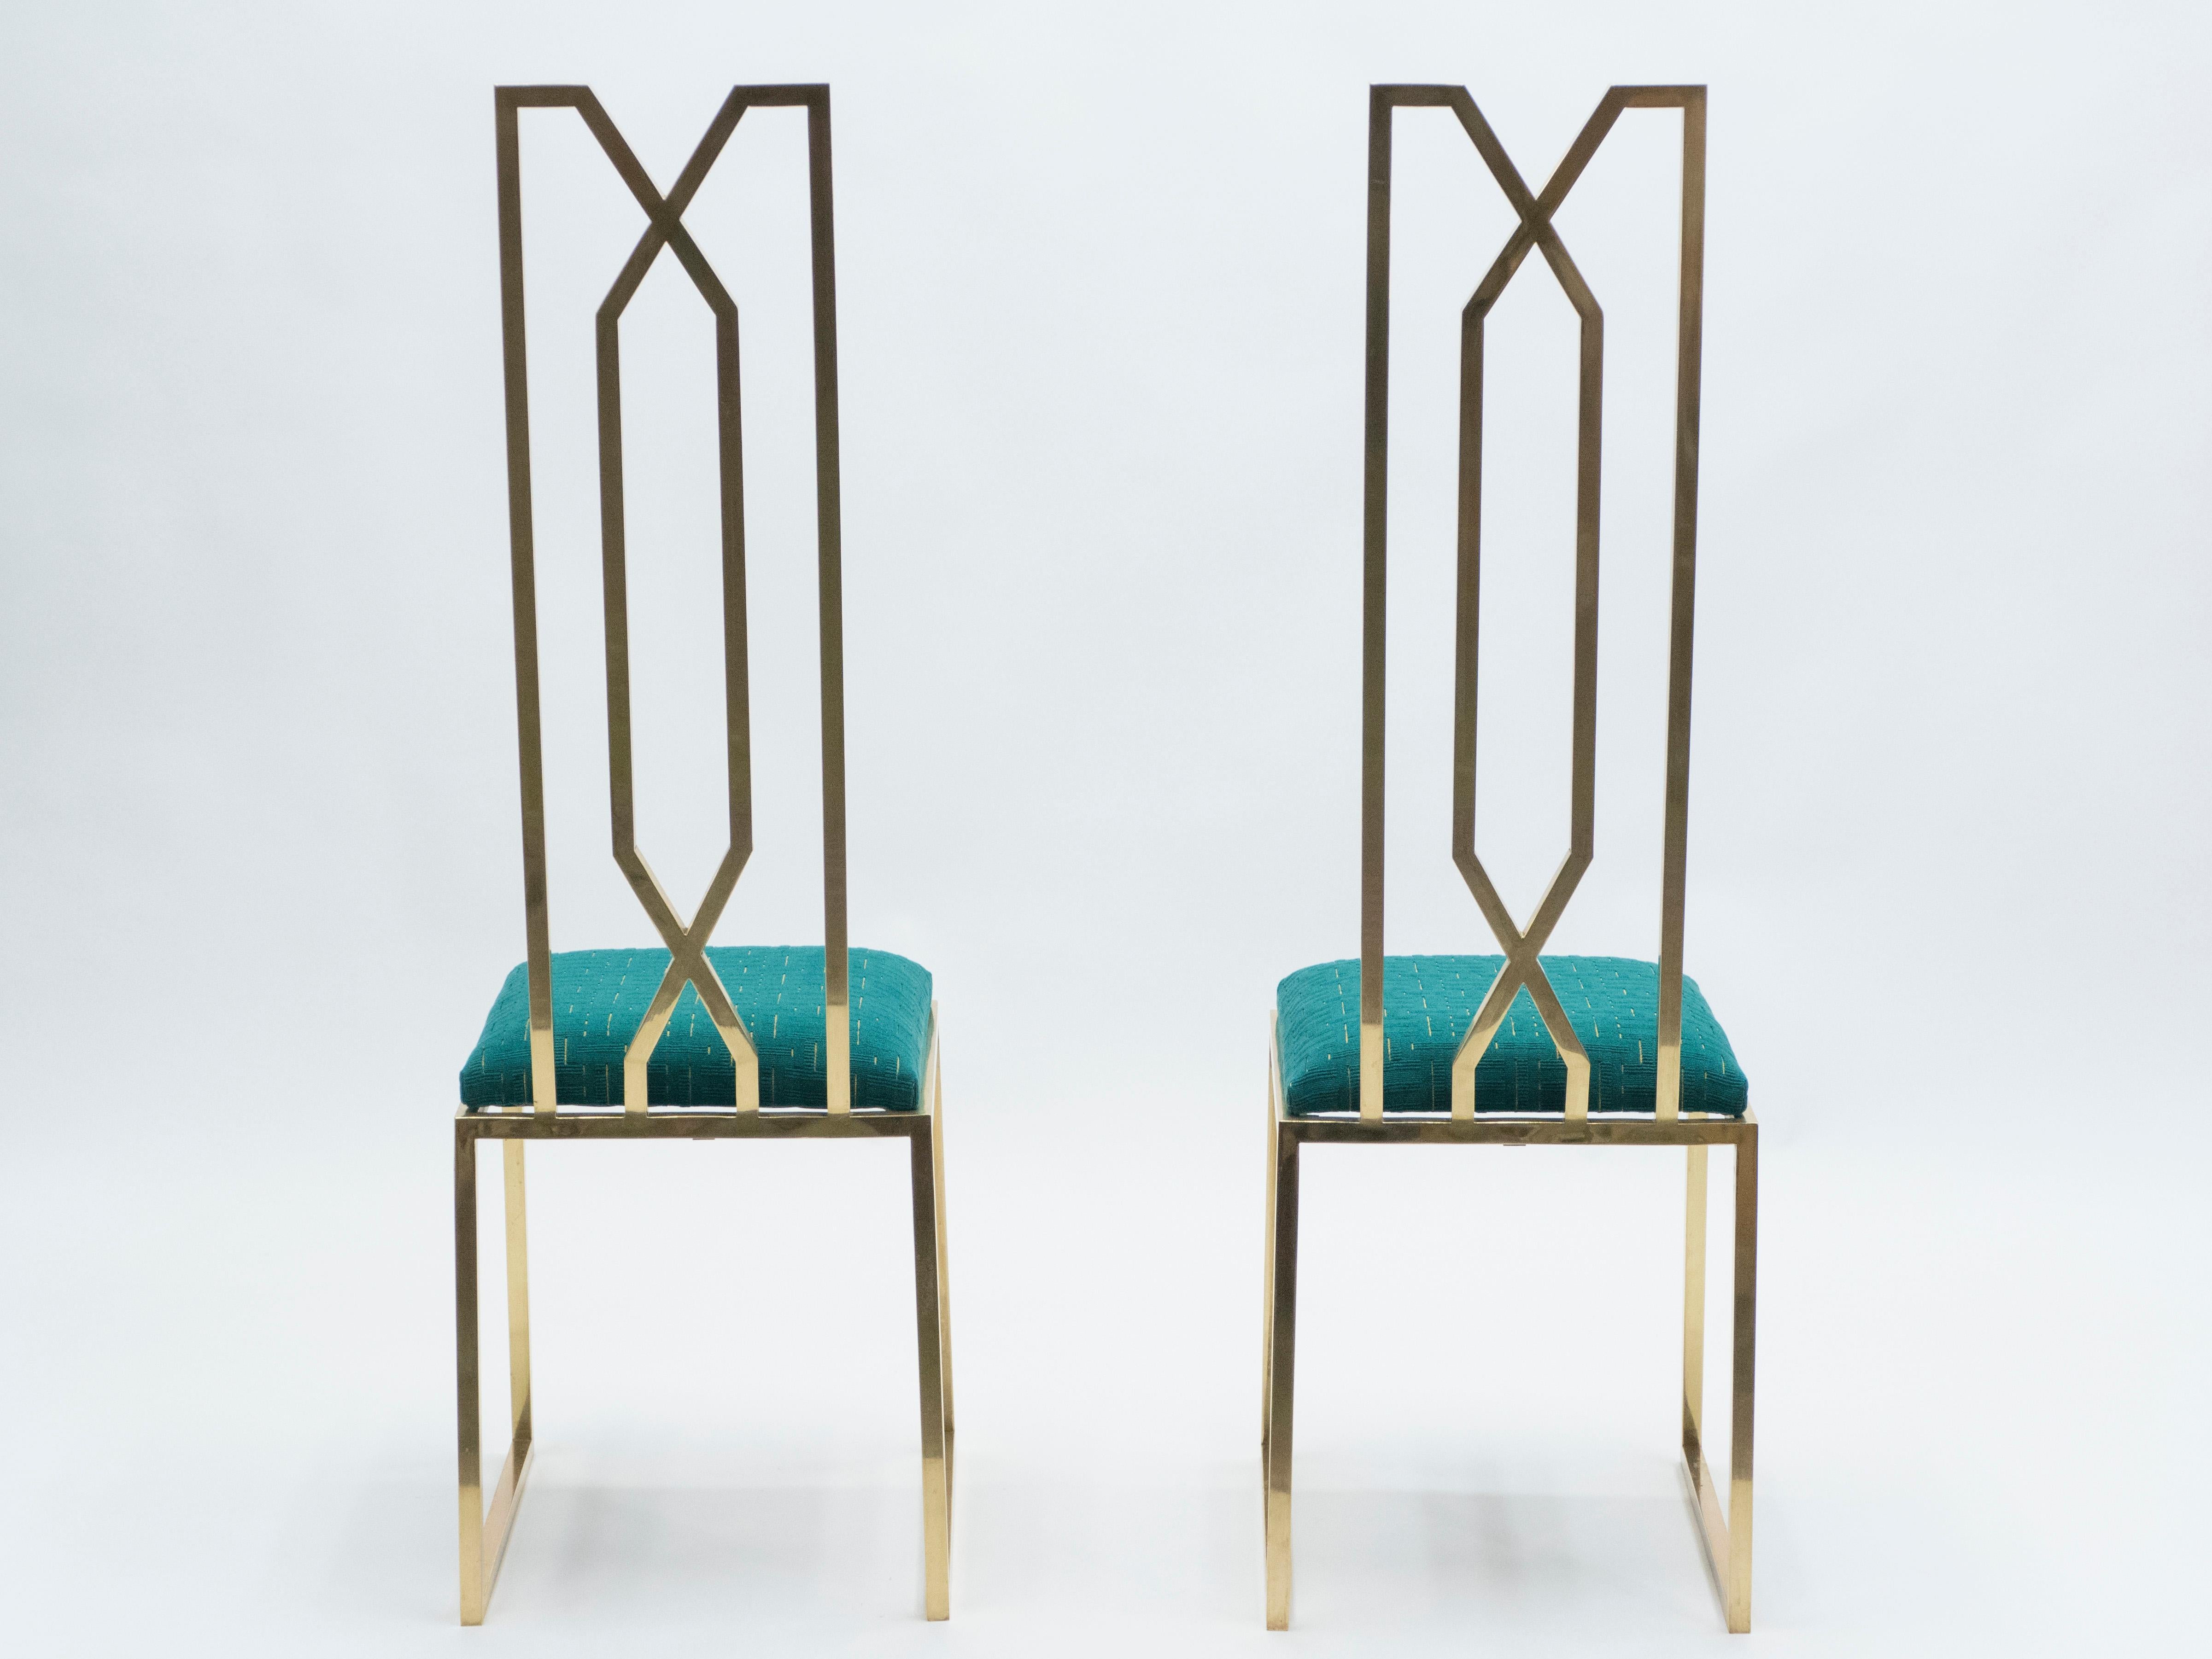 French Rare Pair of Brass Chairs Signed by Alain Delon for Jean Charles, 1970s